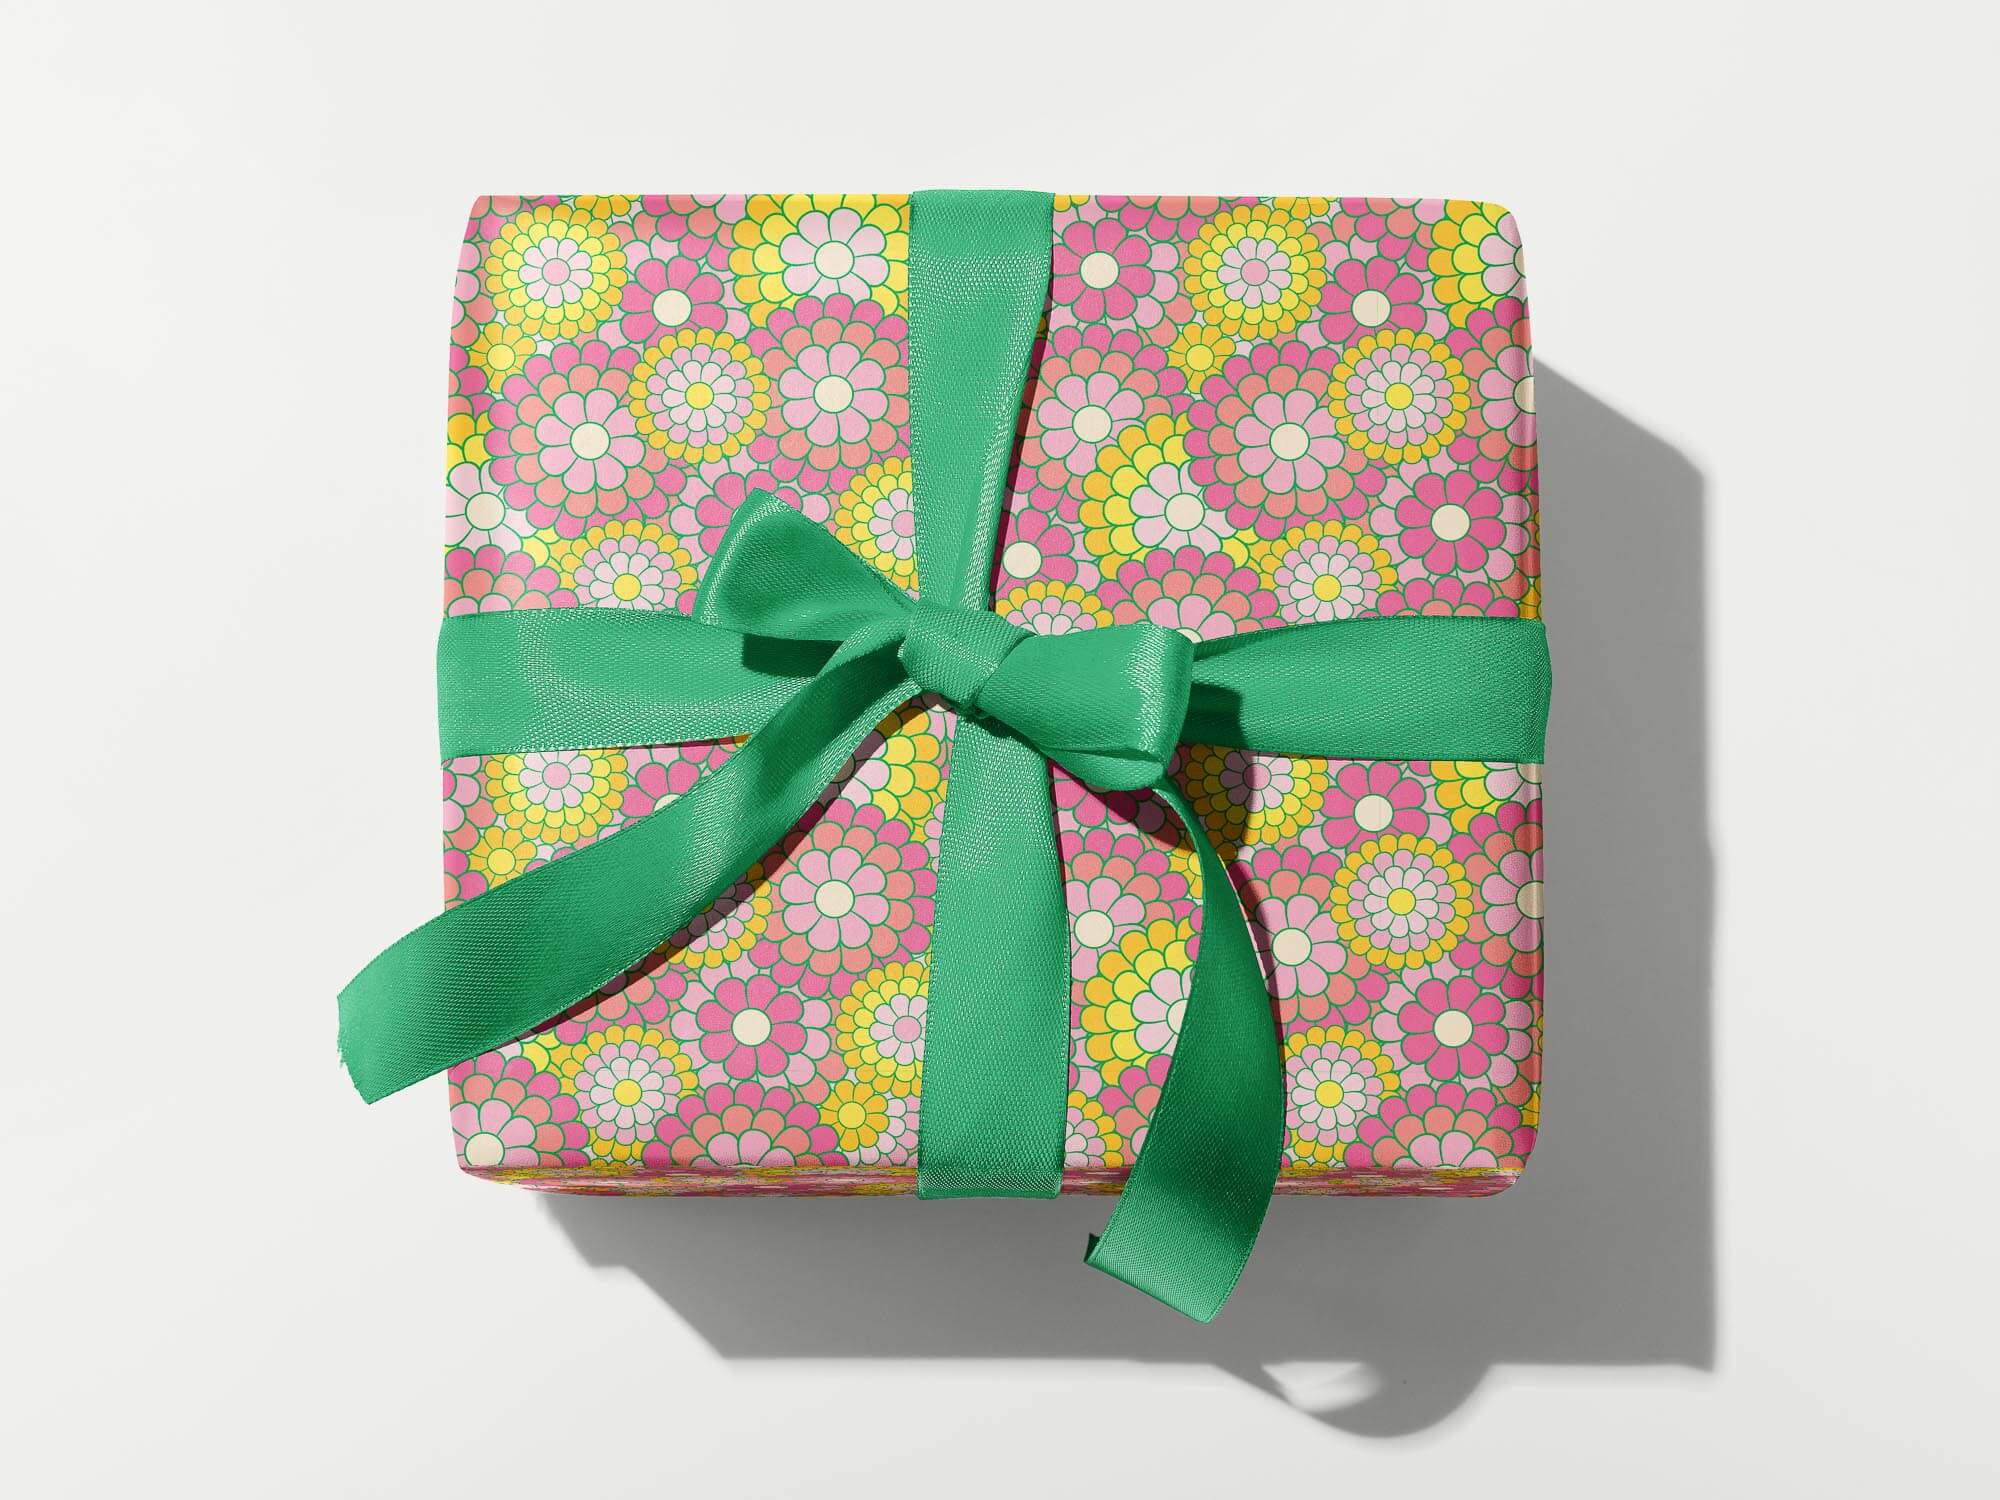 Zinnia pattern colorful, modern, floral gift wrapping sheets with fun prints and patterns by @mydarlin_bk. Made in USA.